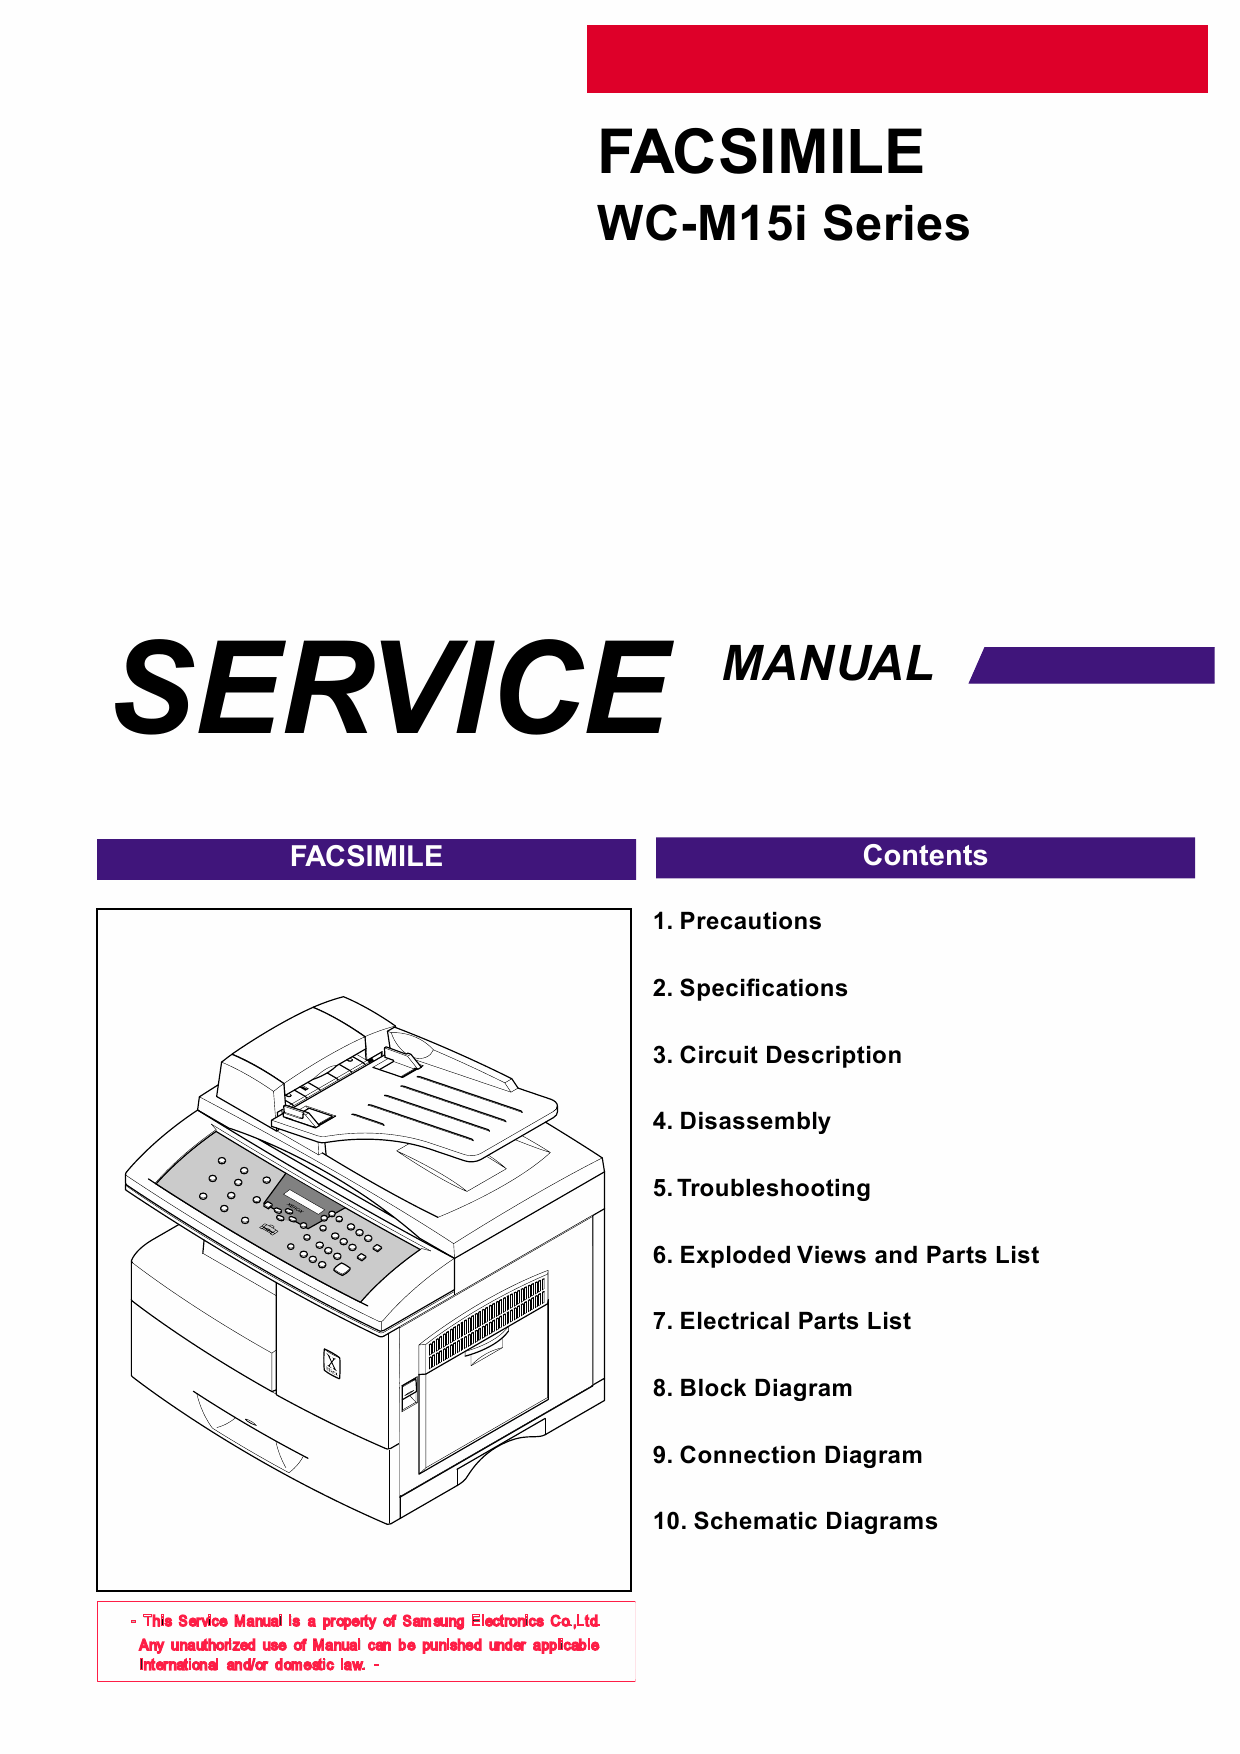 Samsung FACXIMILE WC-M15i Parts and Service Manual-1